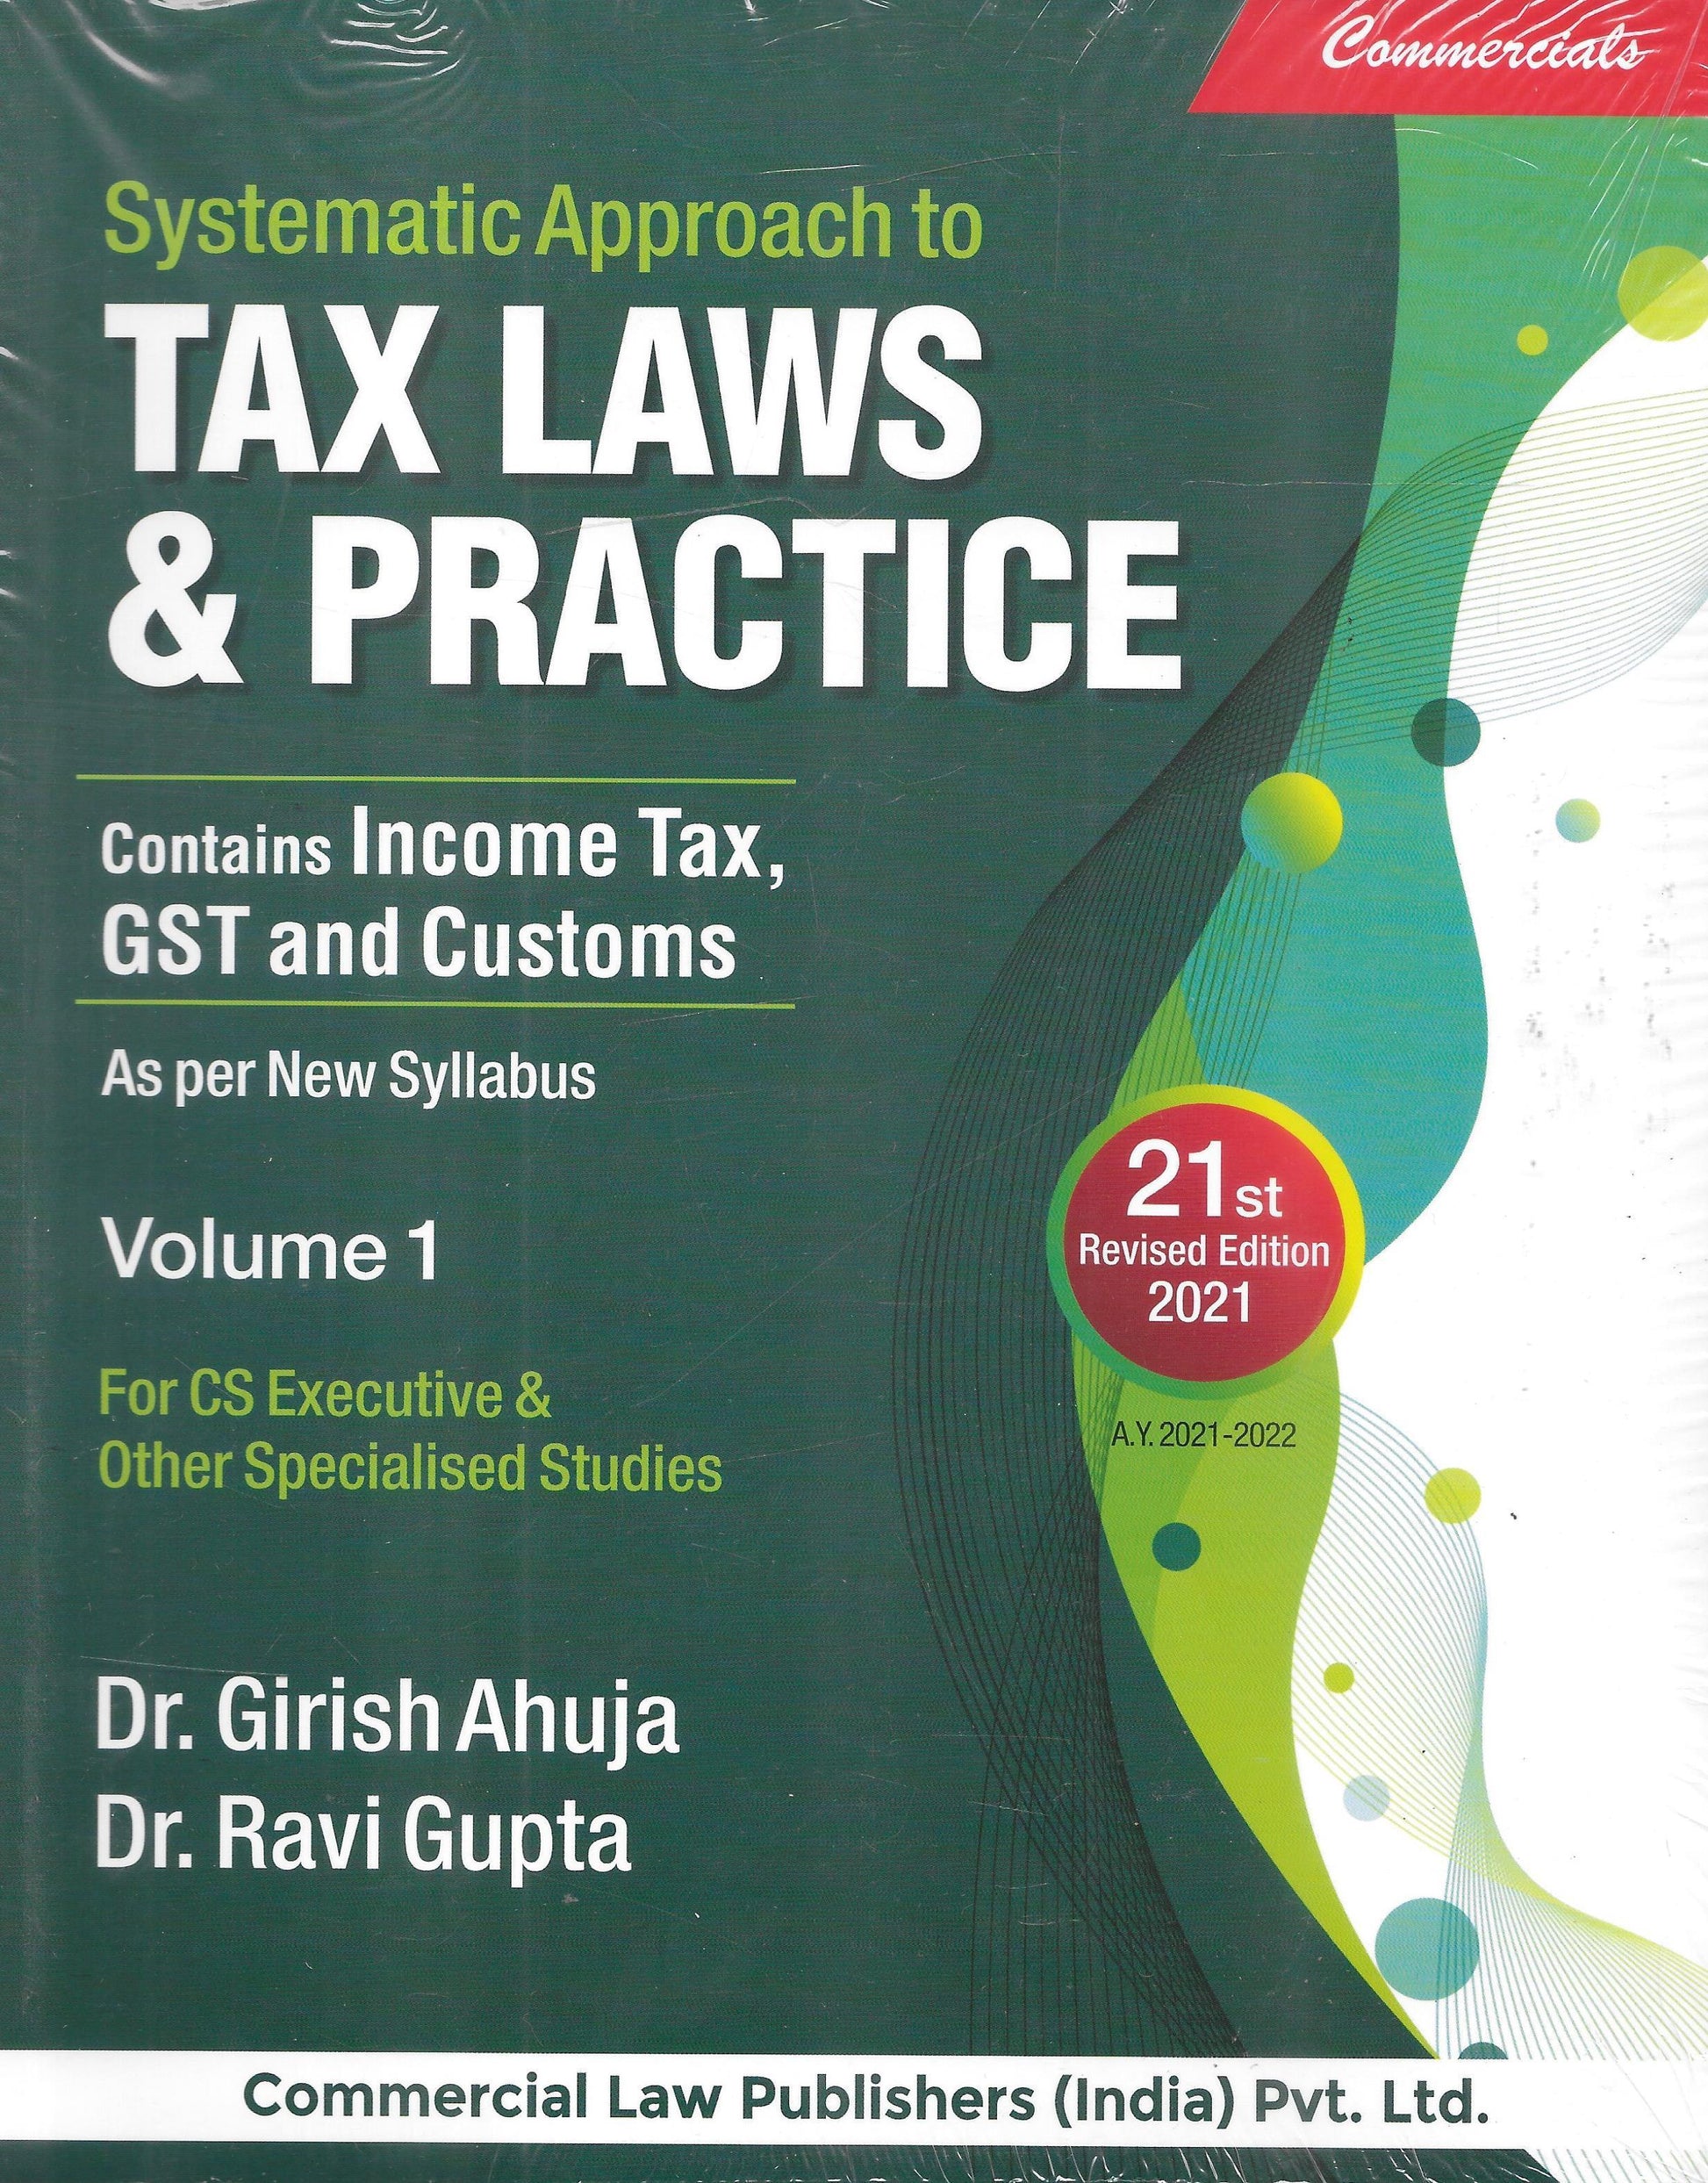 Systematic Approach To Tax Laws & Practice - M&J Services